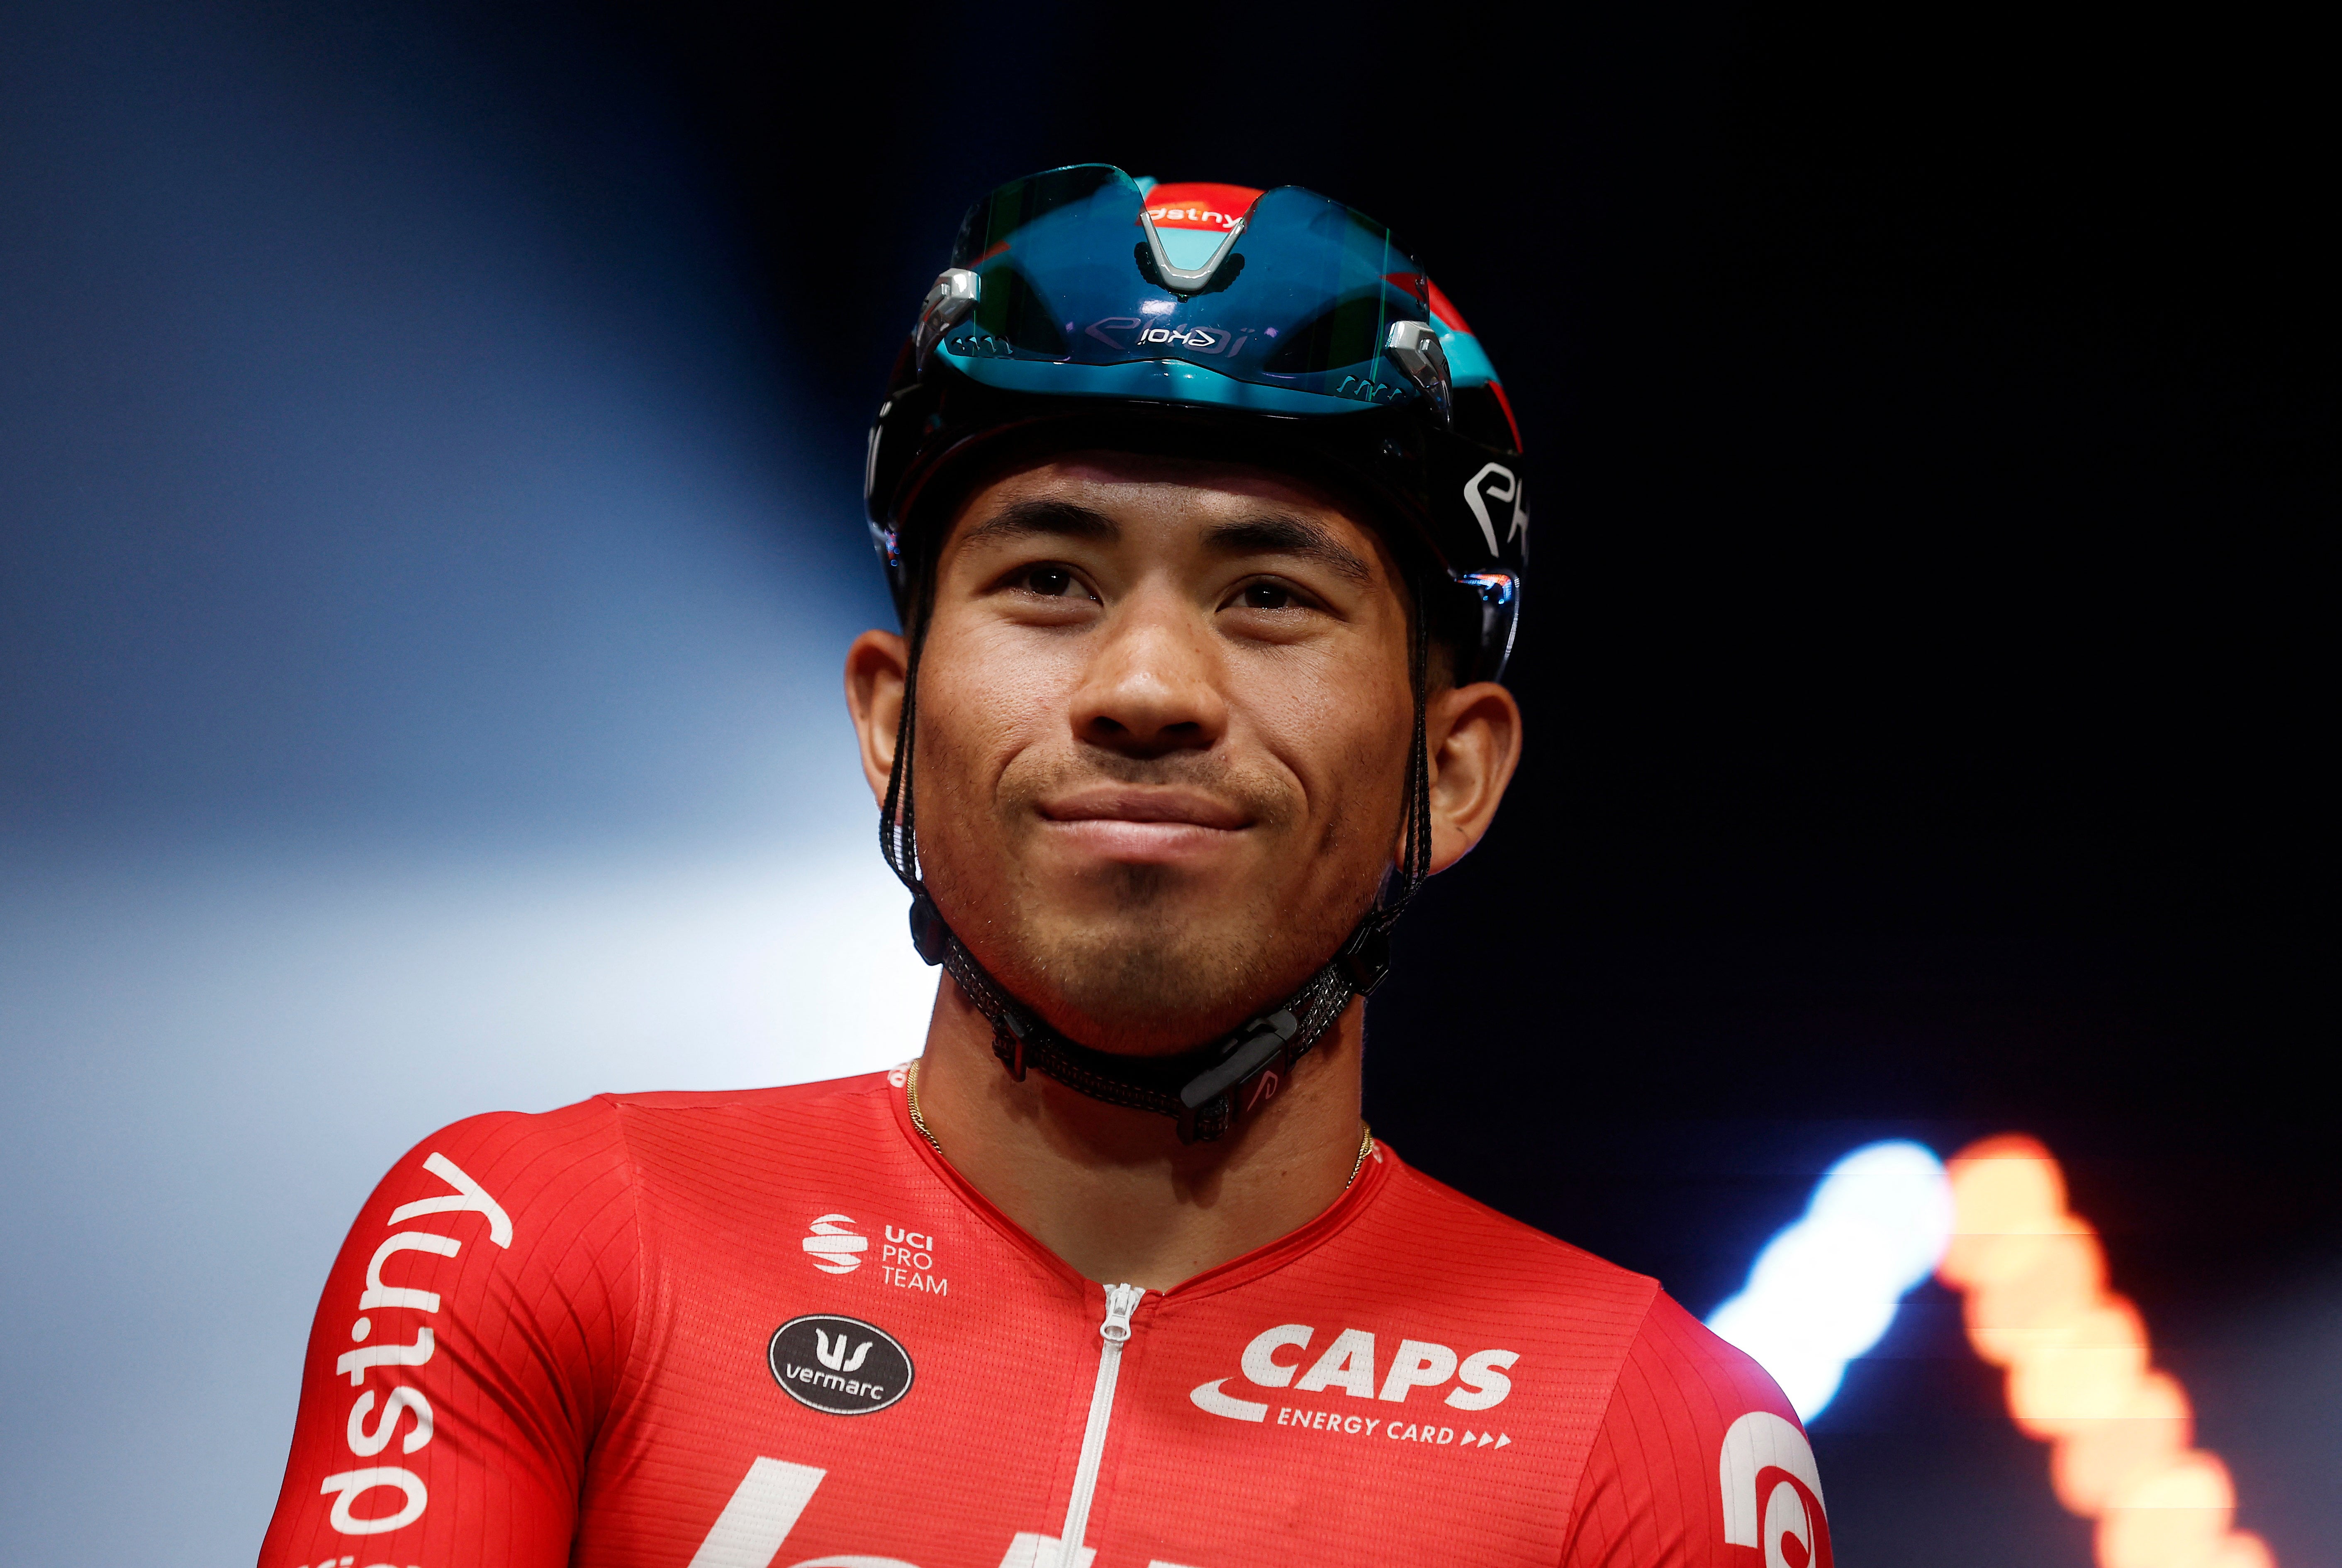 Caleb Ewan has pulled out of the race